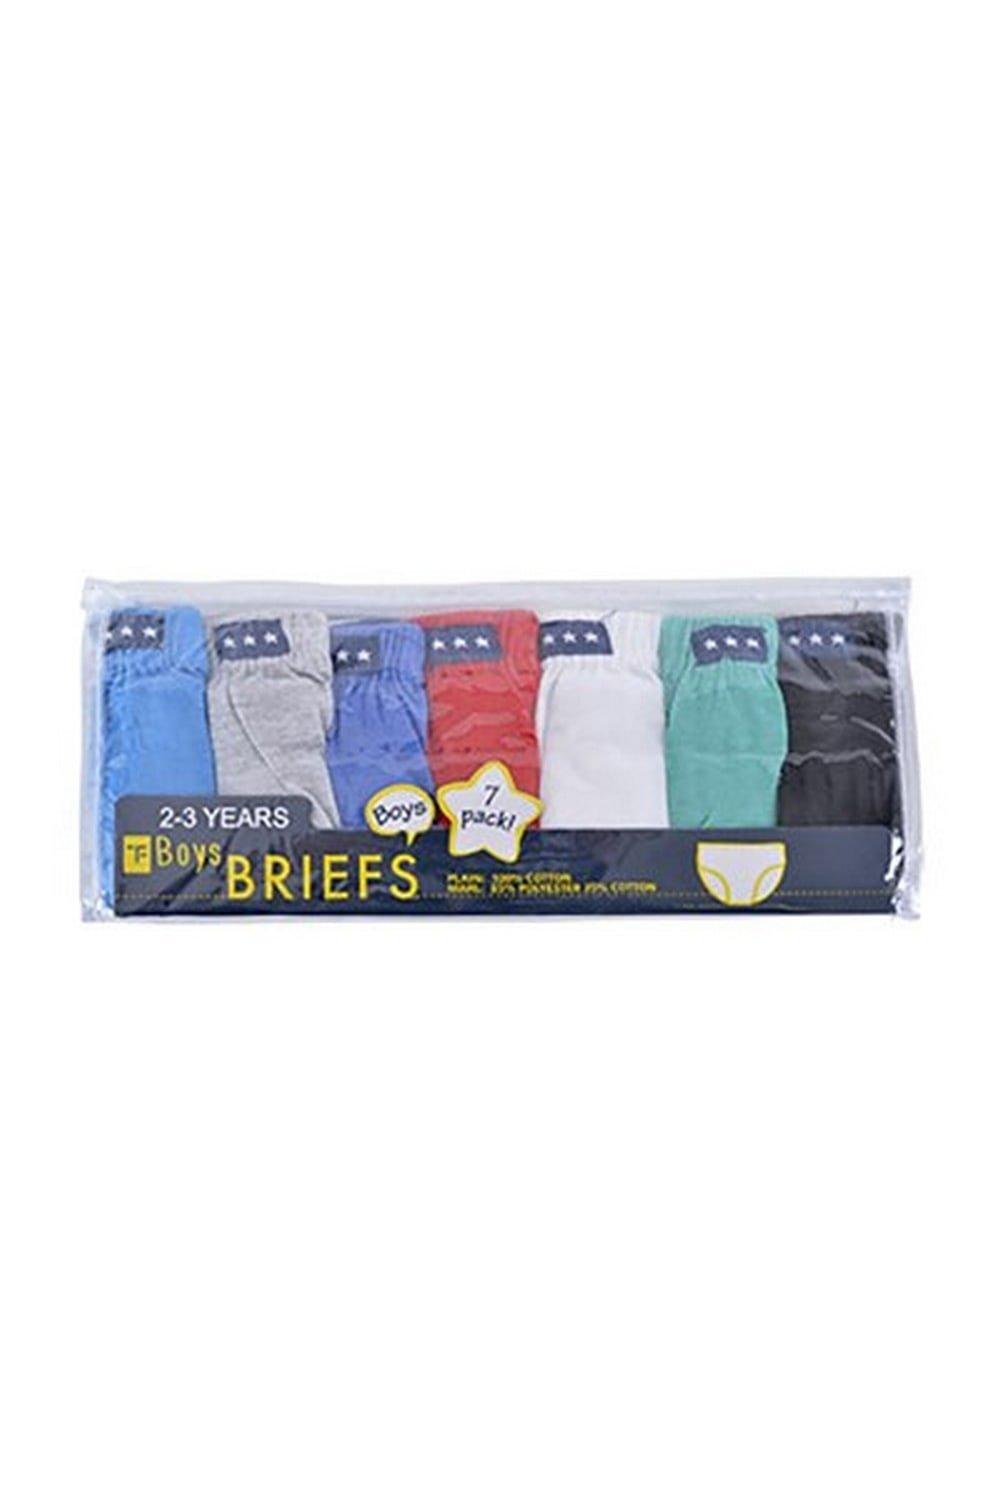 T- Briefs (Pack Of 7)